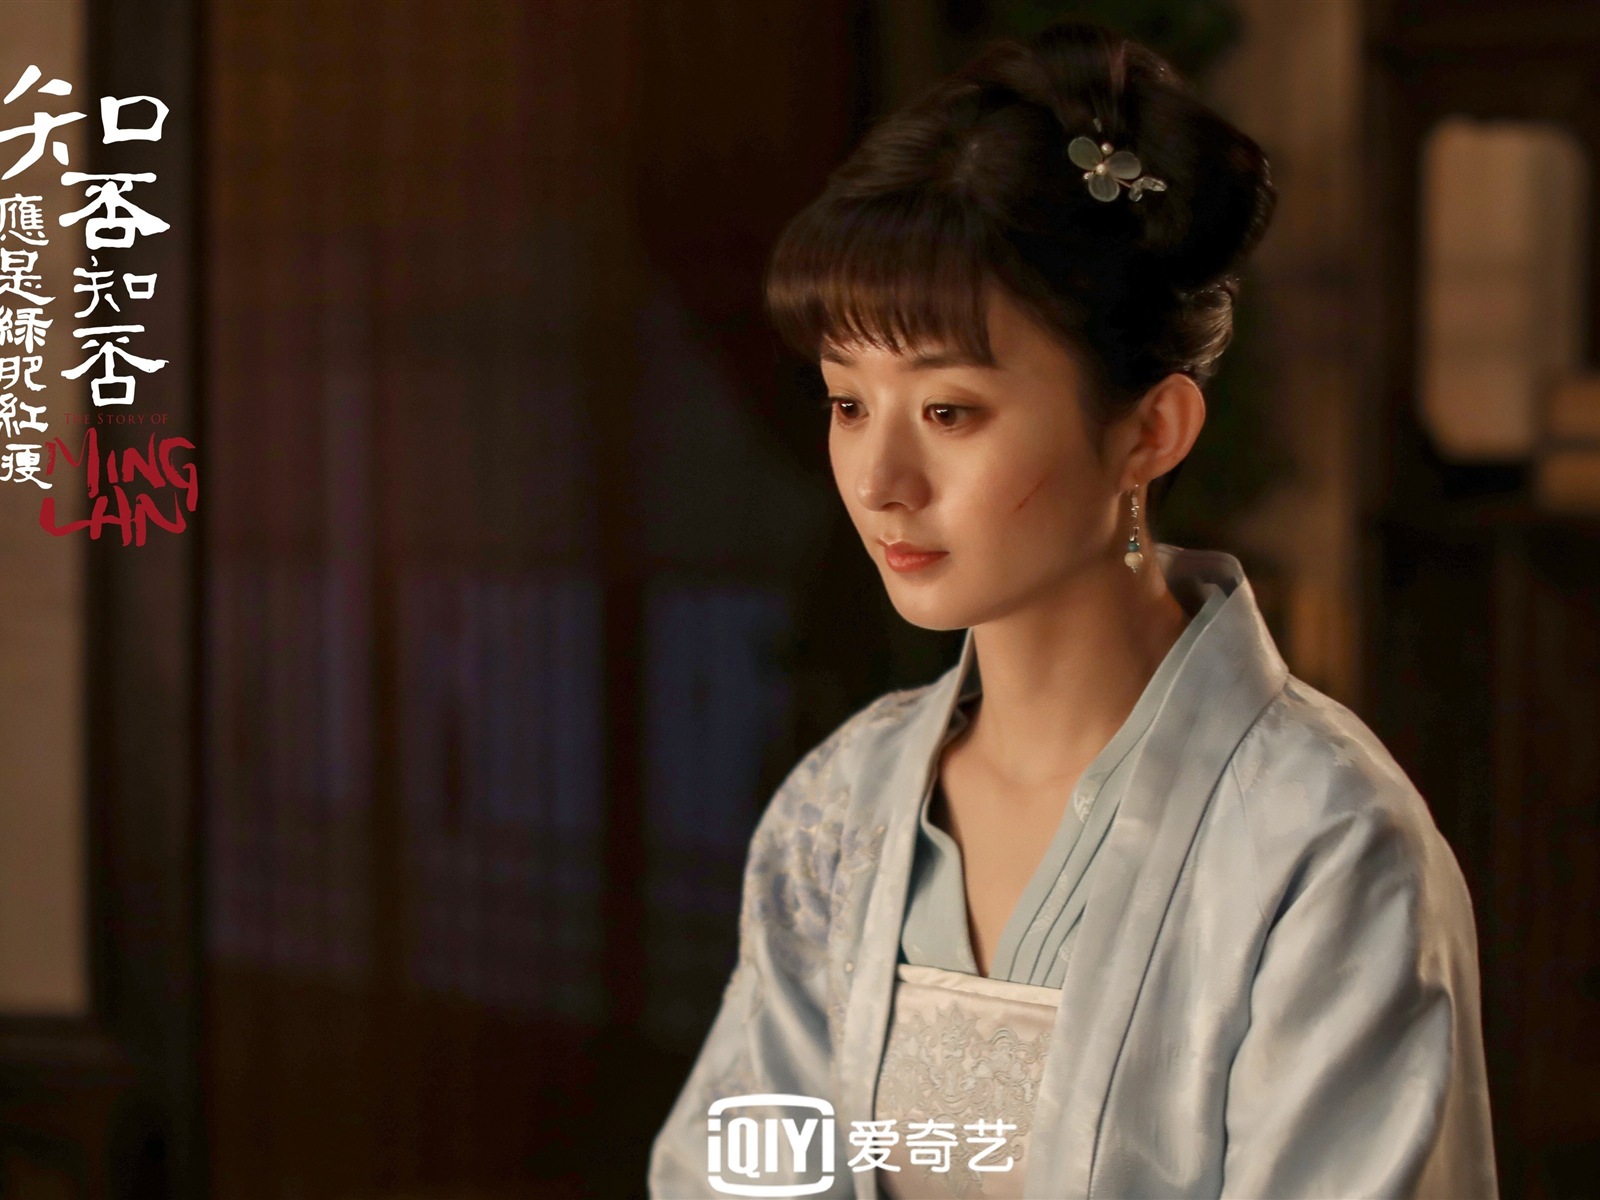 The Story Of MingLan, TV series HD wallpapers #36 - 1600x1200